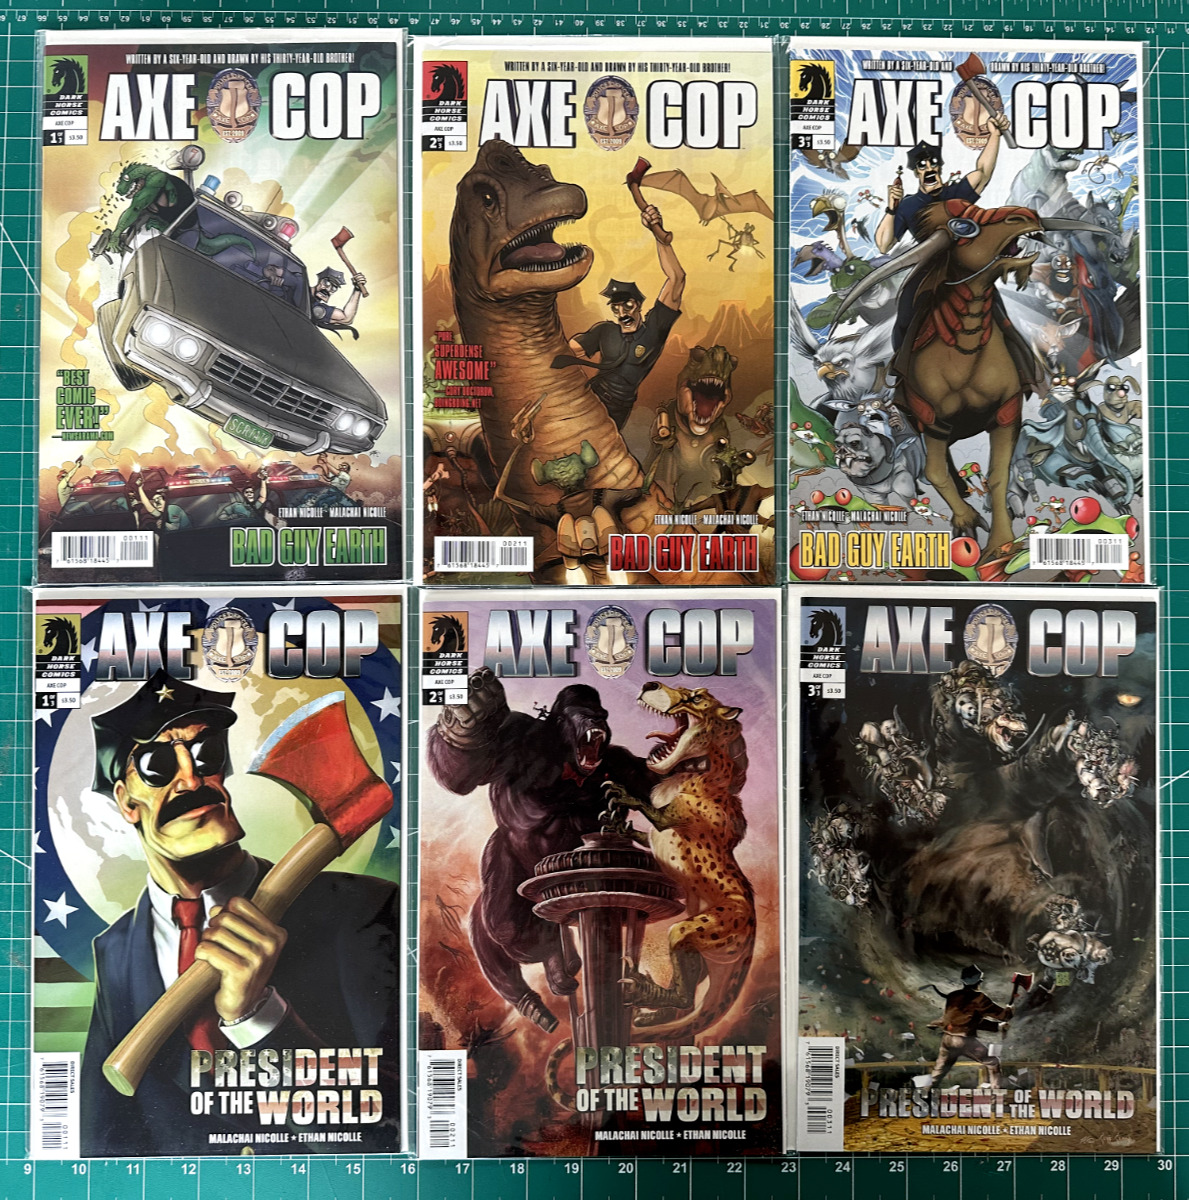 AXE COP: PRESIDENT OF THE WORLD #1-3 COMPLETE + BAD GUY EARTH #1-3 COMPLETE